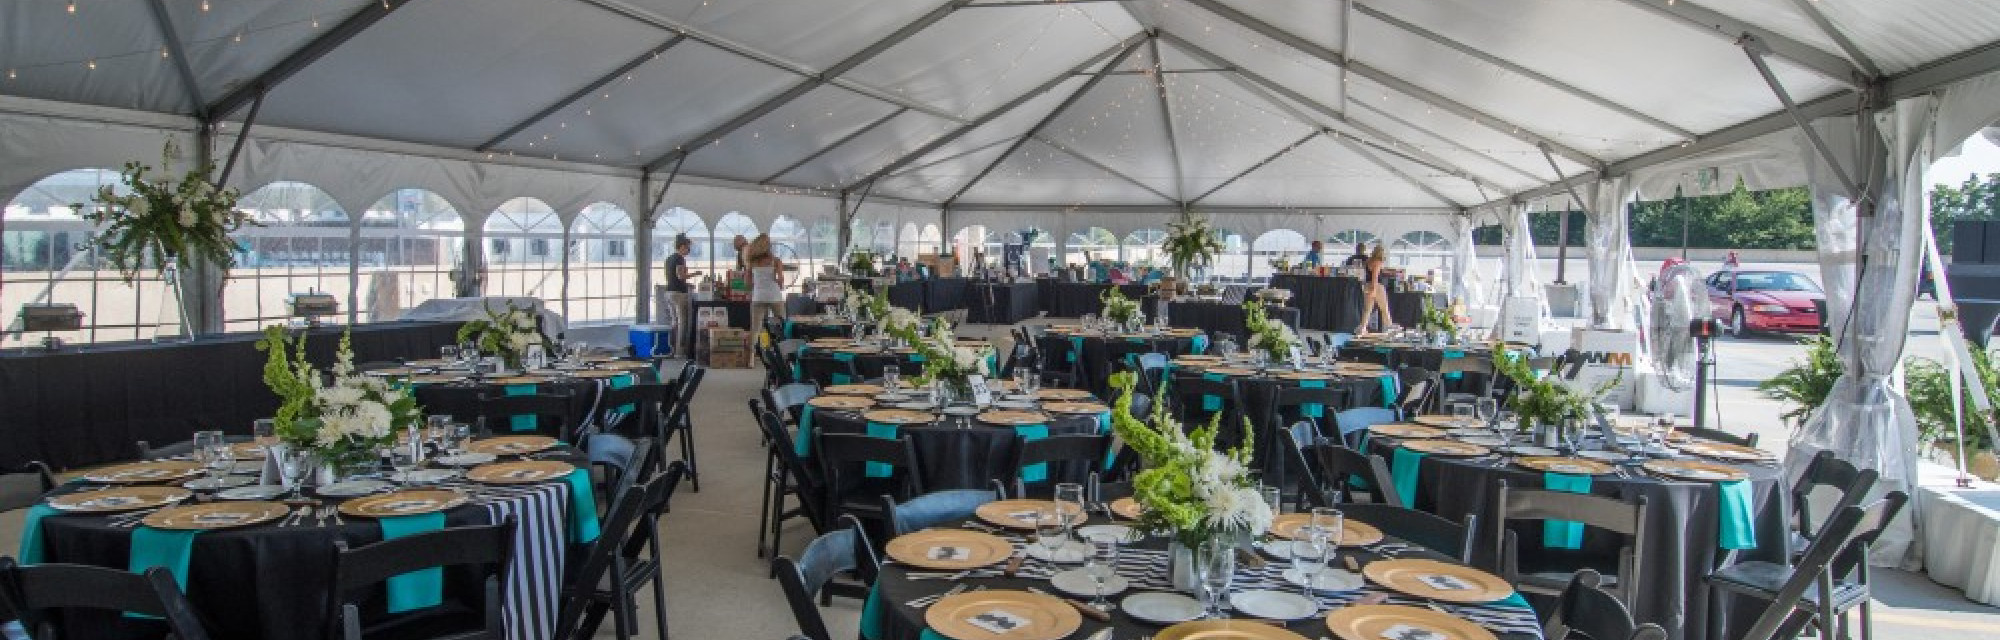 corporate tent rental dinner lunch awards banquet